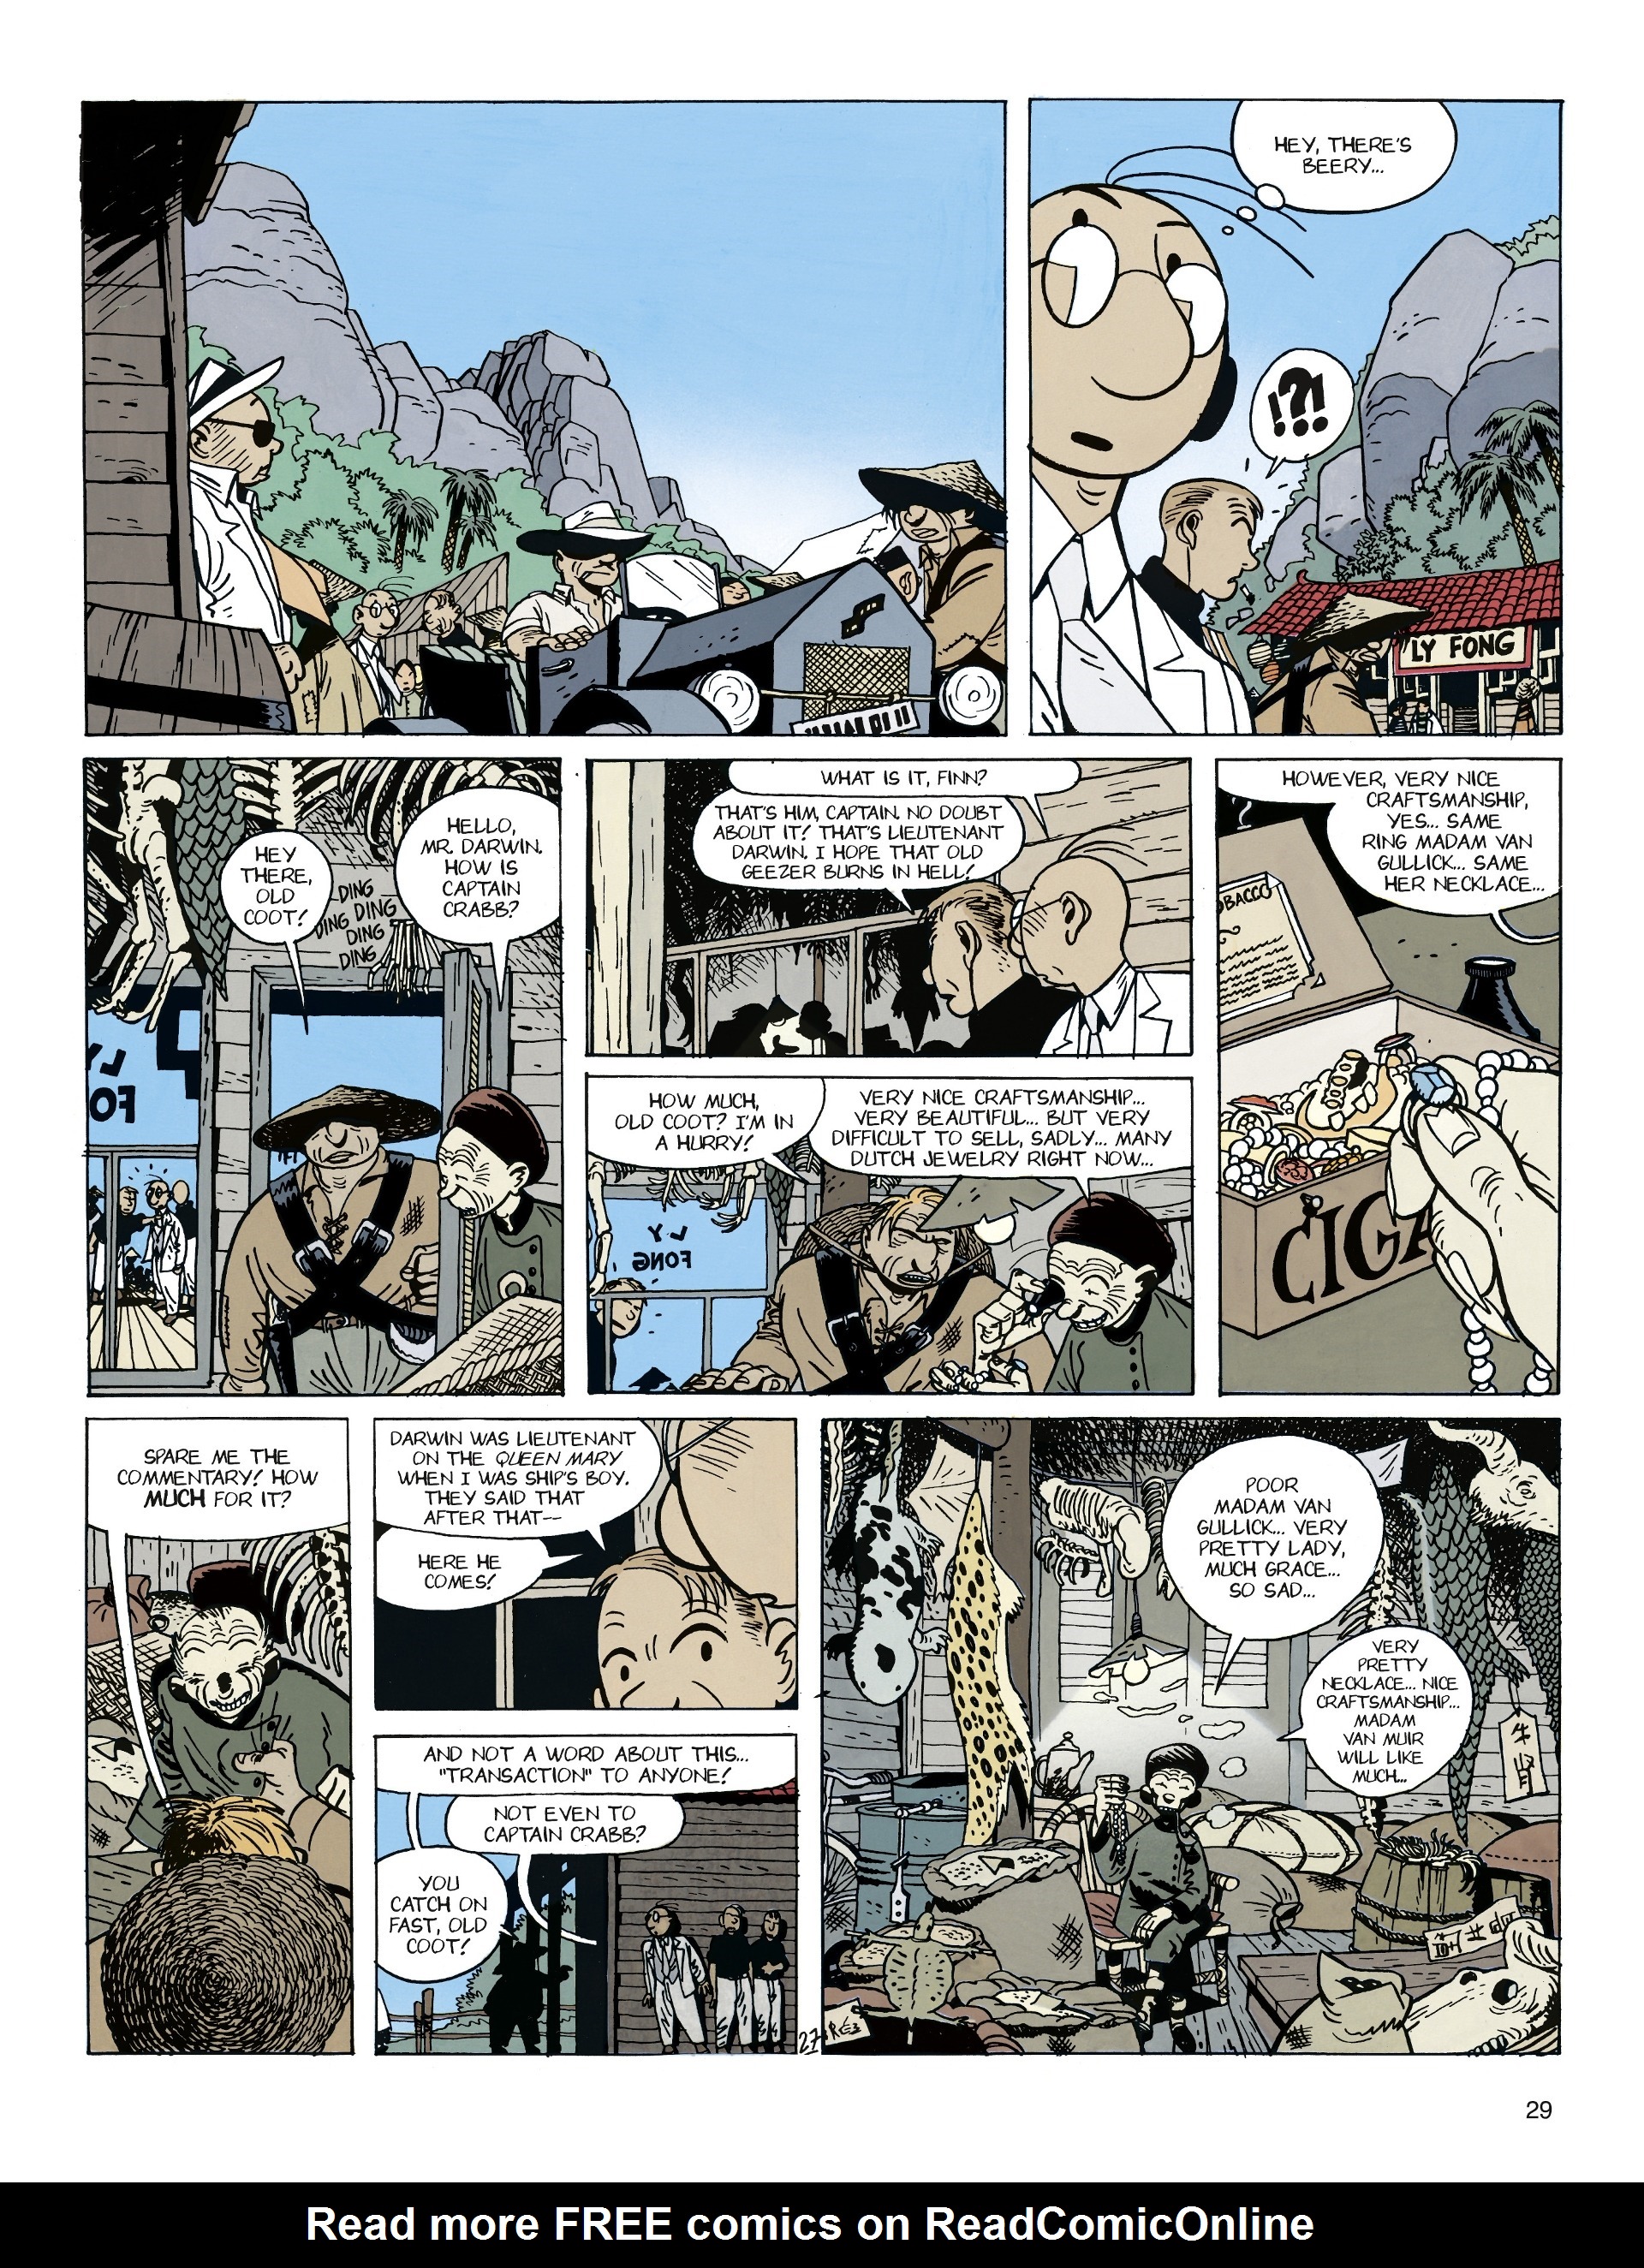 Read online Theodore Poussin comic -  Issue #3 - 29